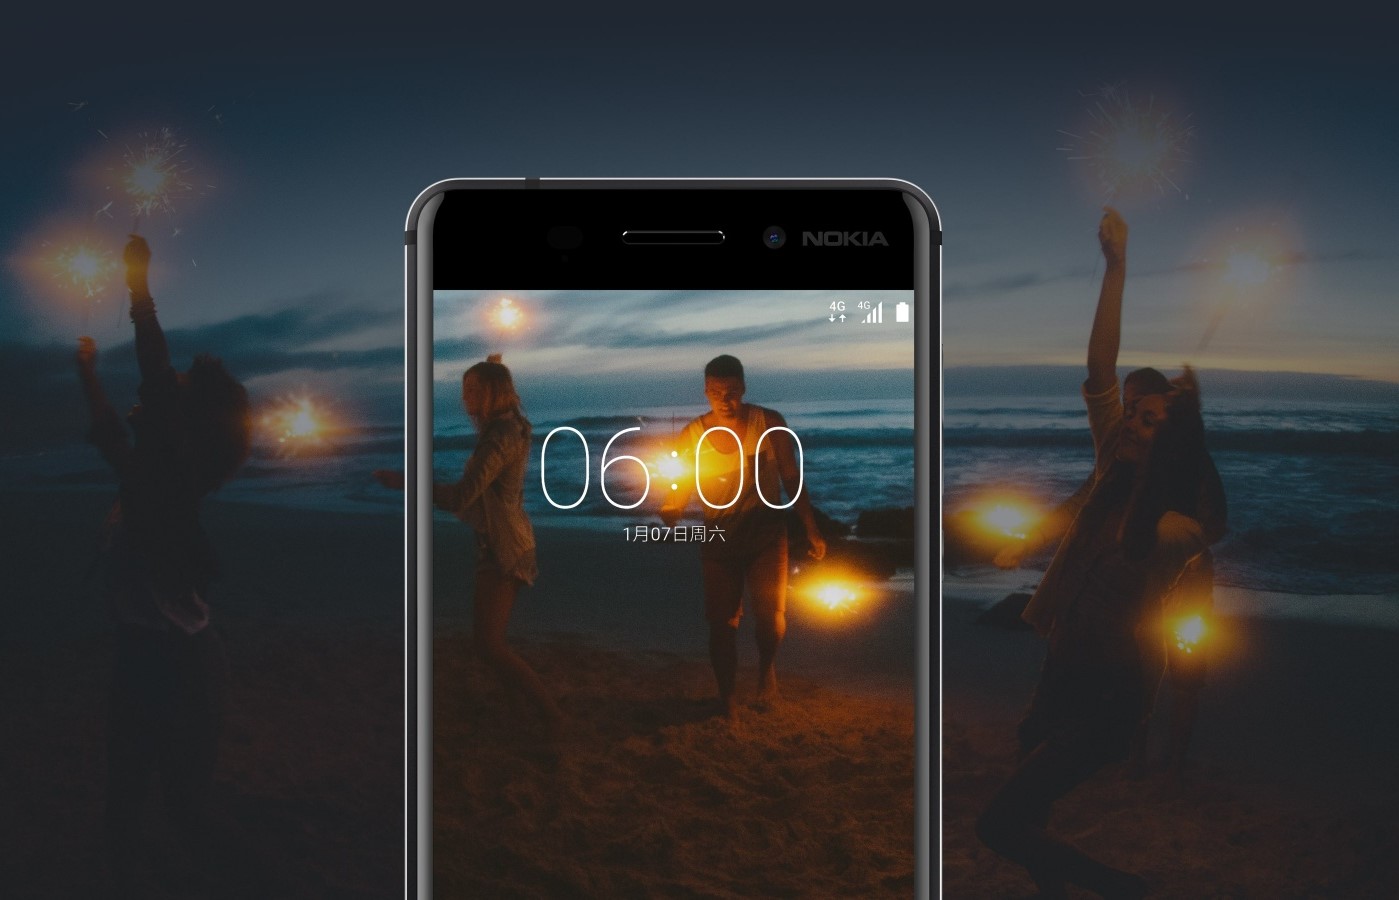 Nokia 6 Android Nougat Smartphone Officially Announced